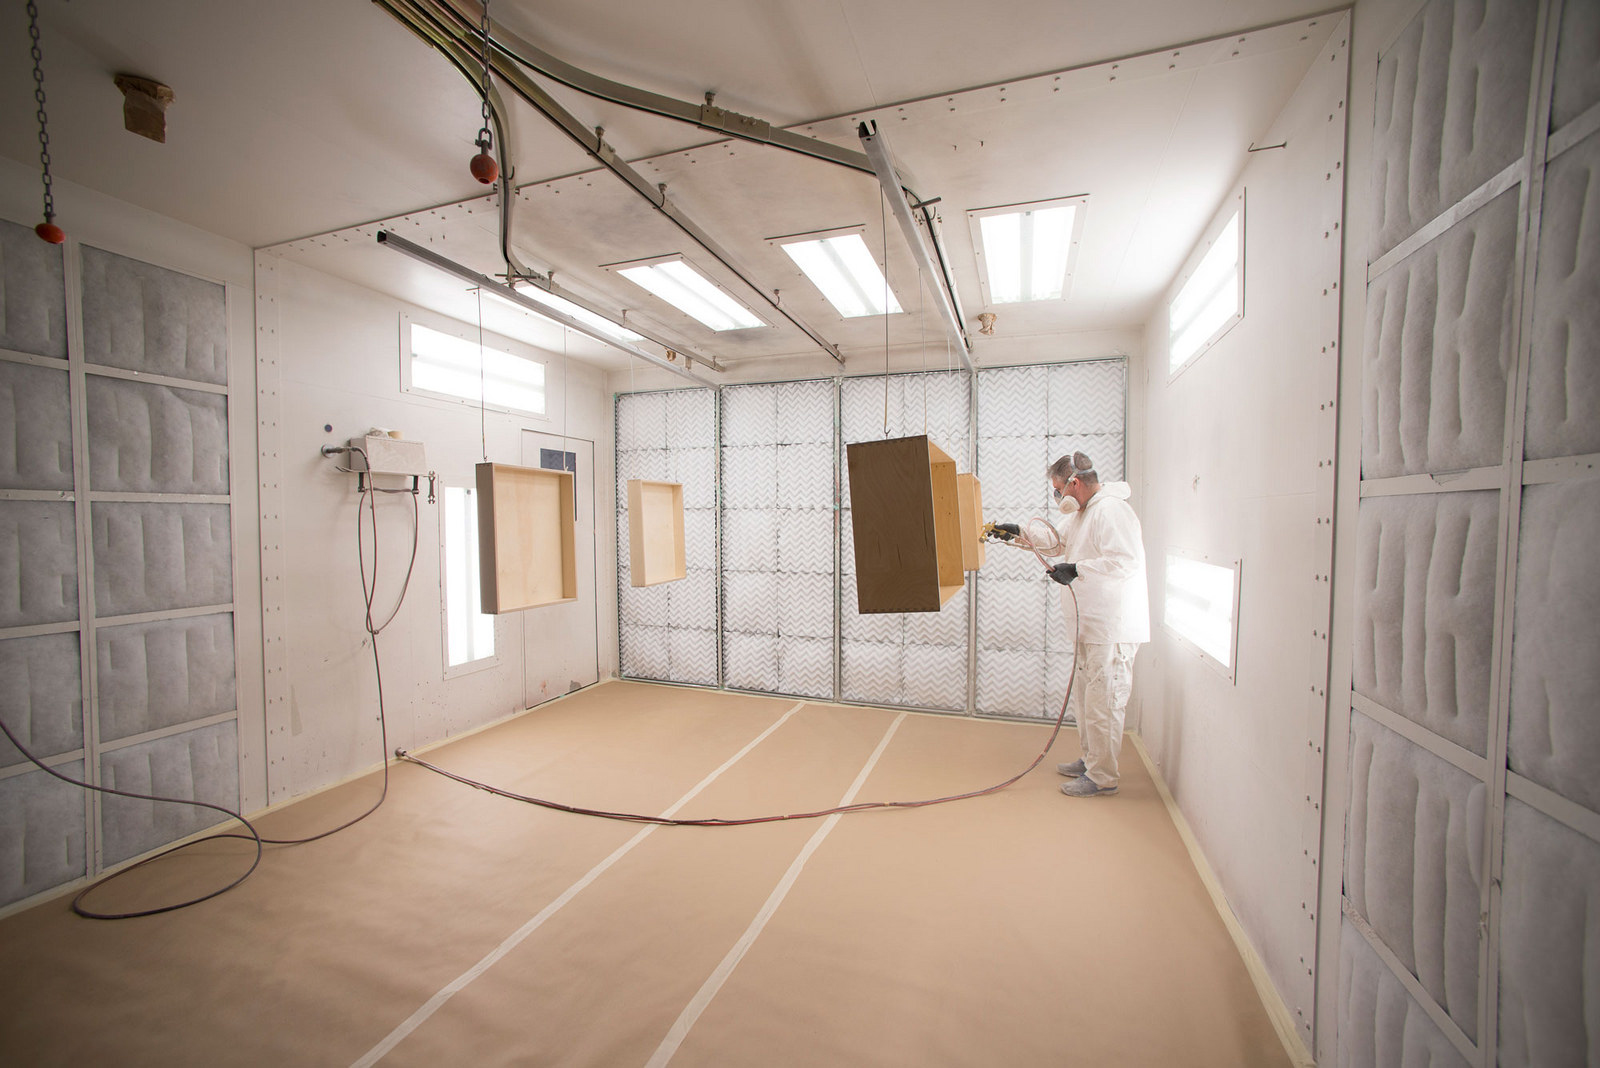 Choosing The Best Paint Booth Based On Product